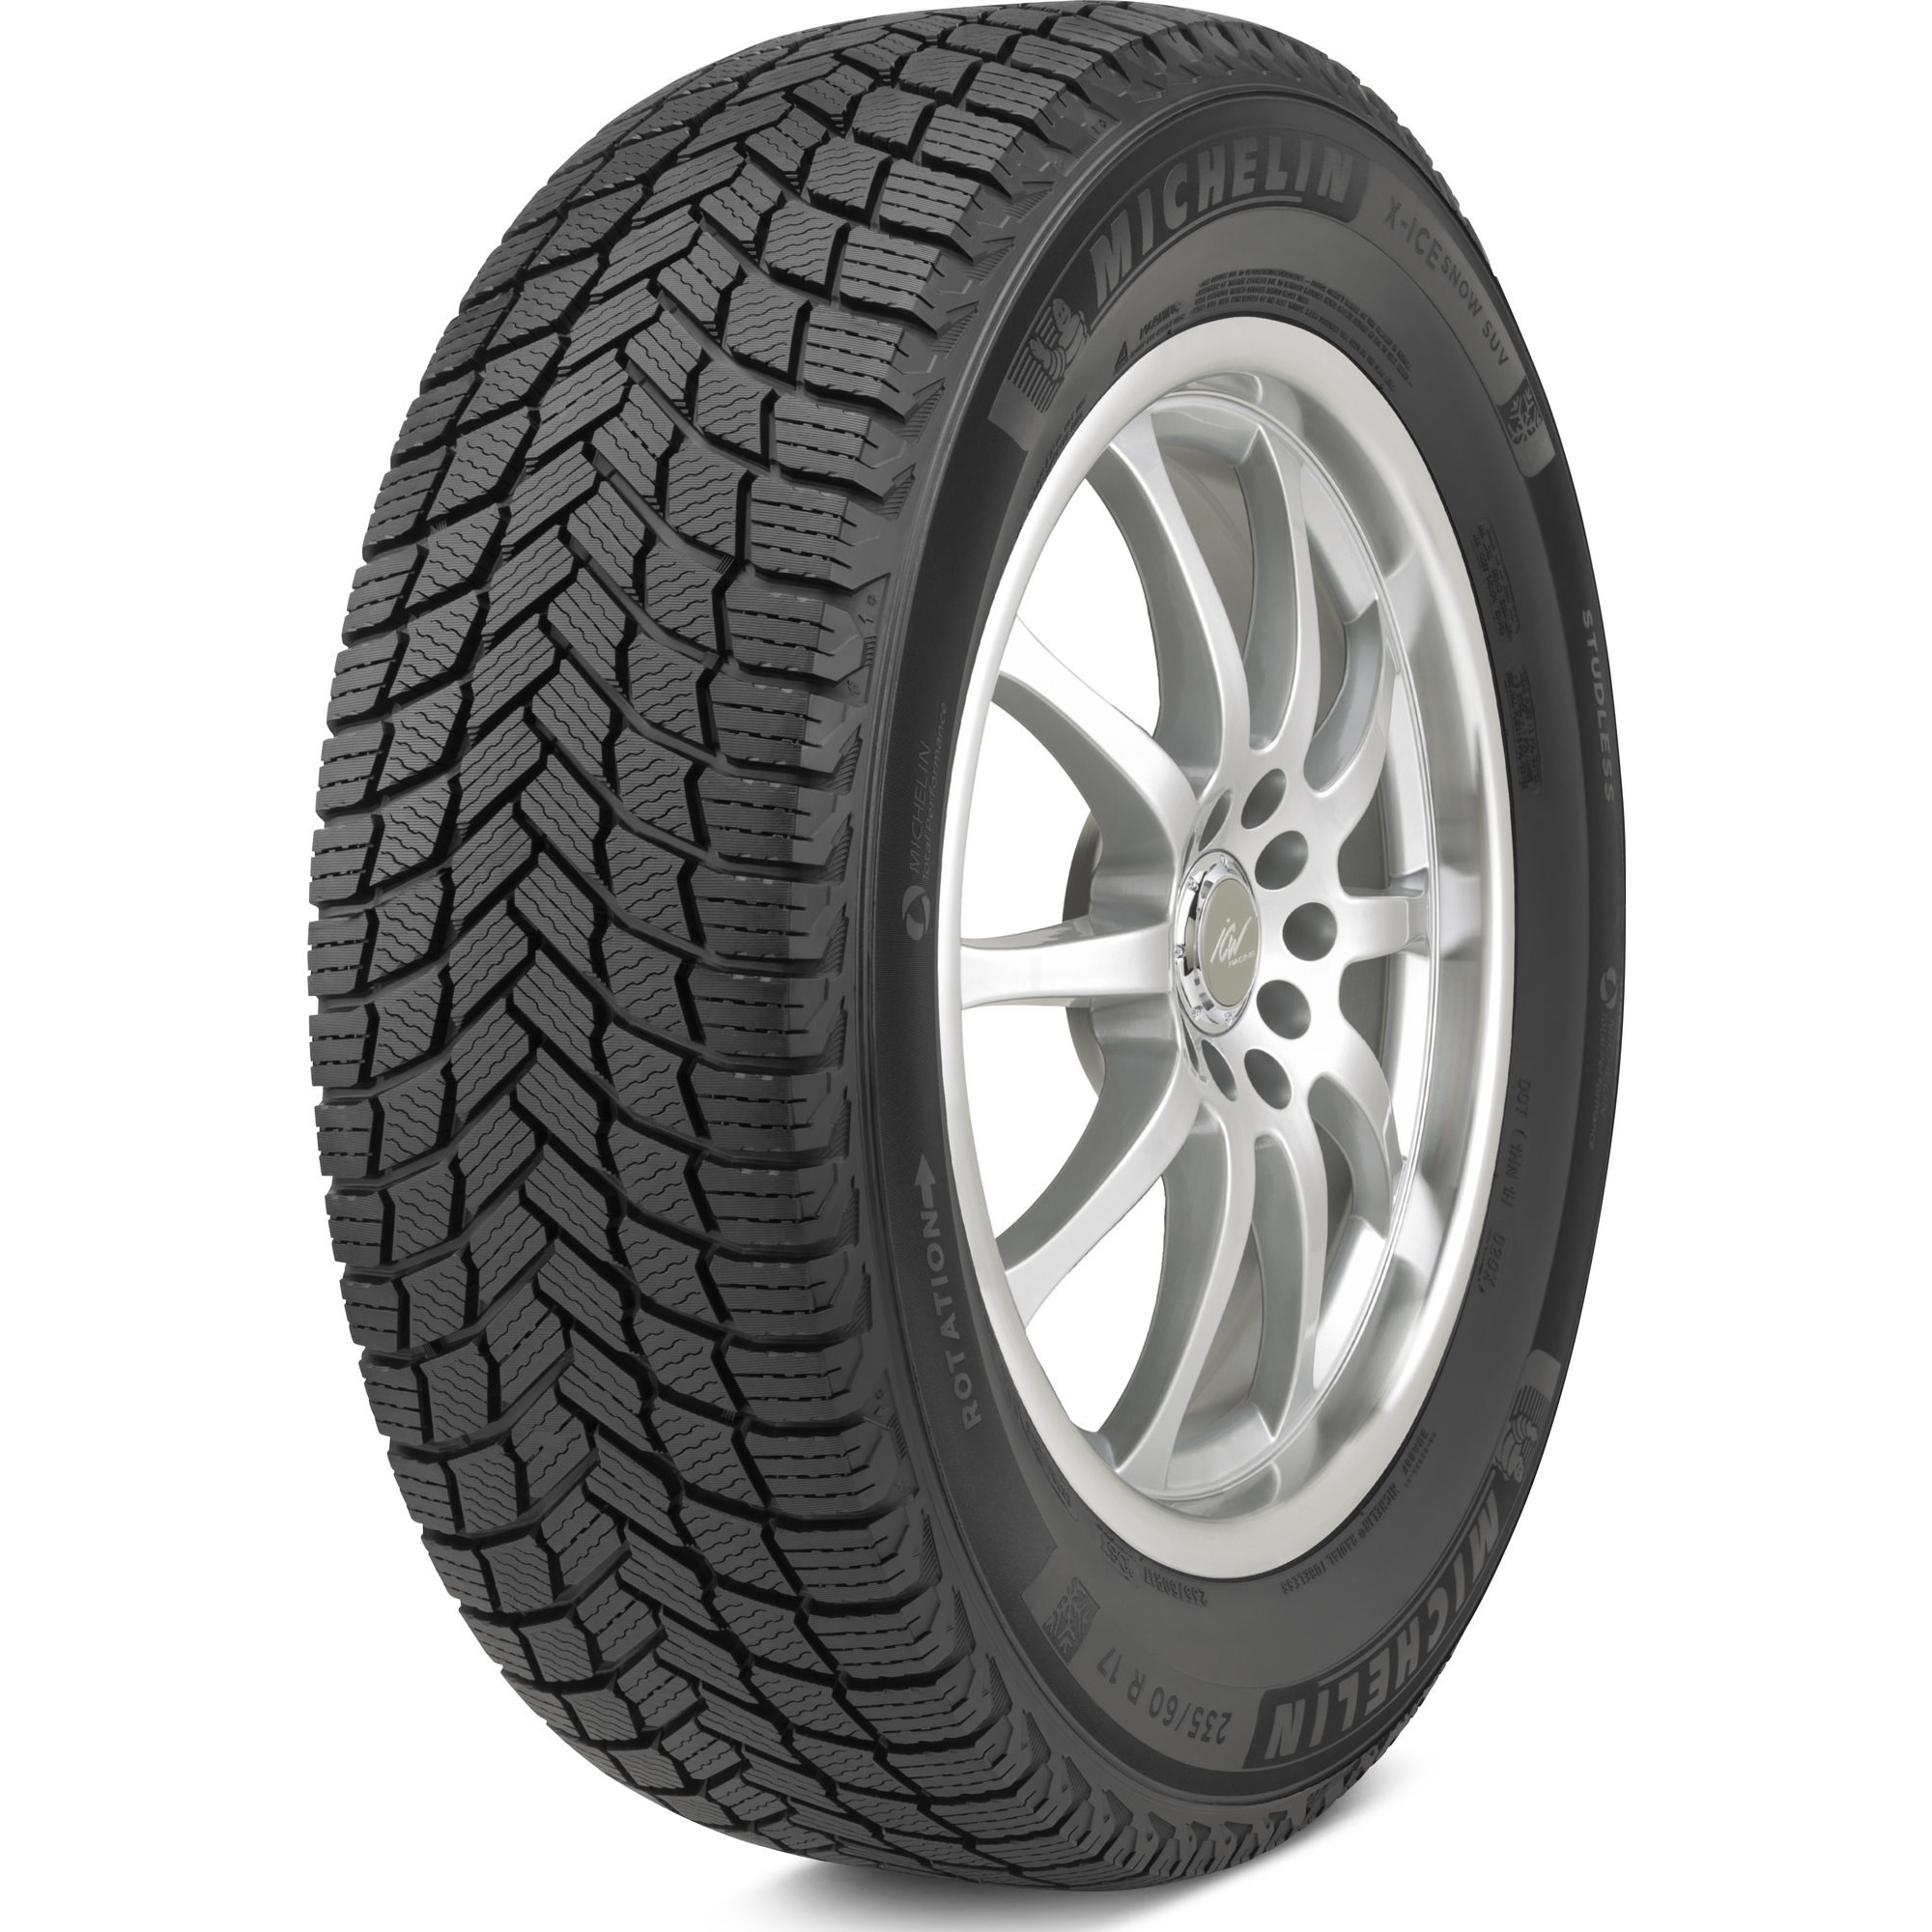 Michelin X Ice Snow SUV Tyre Reviews and Tests